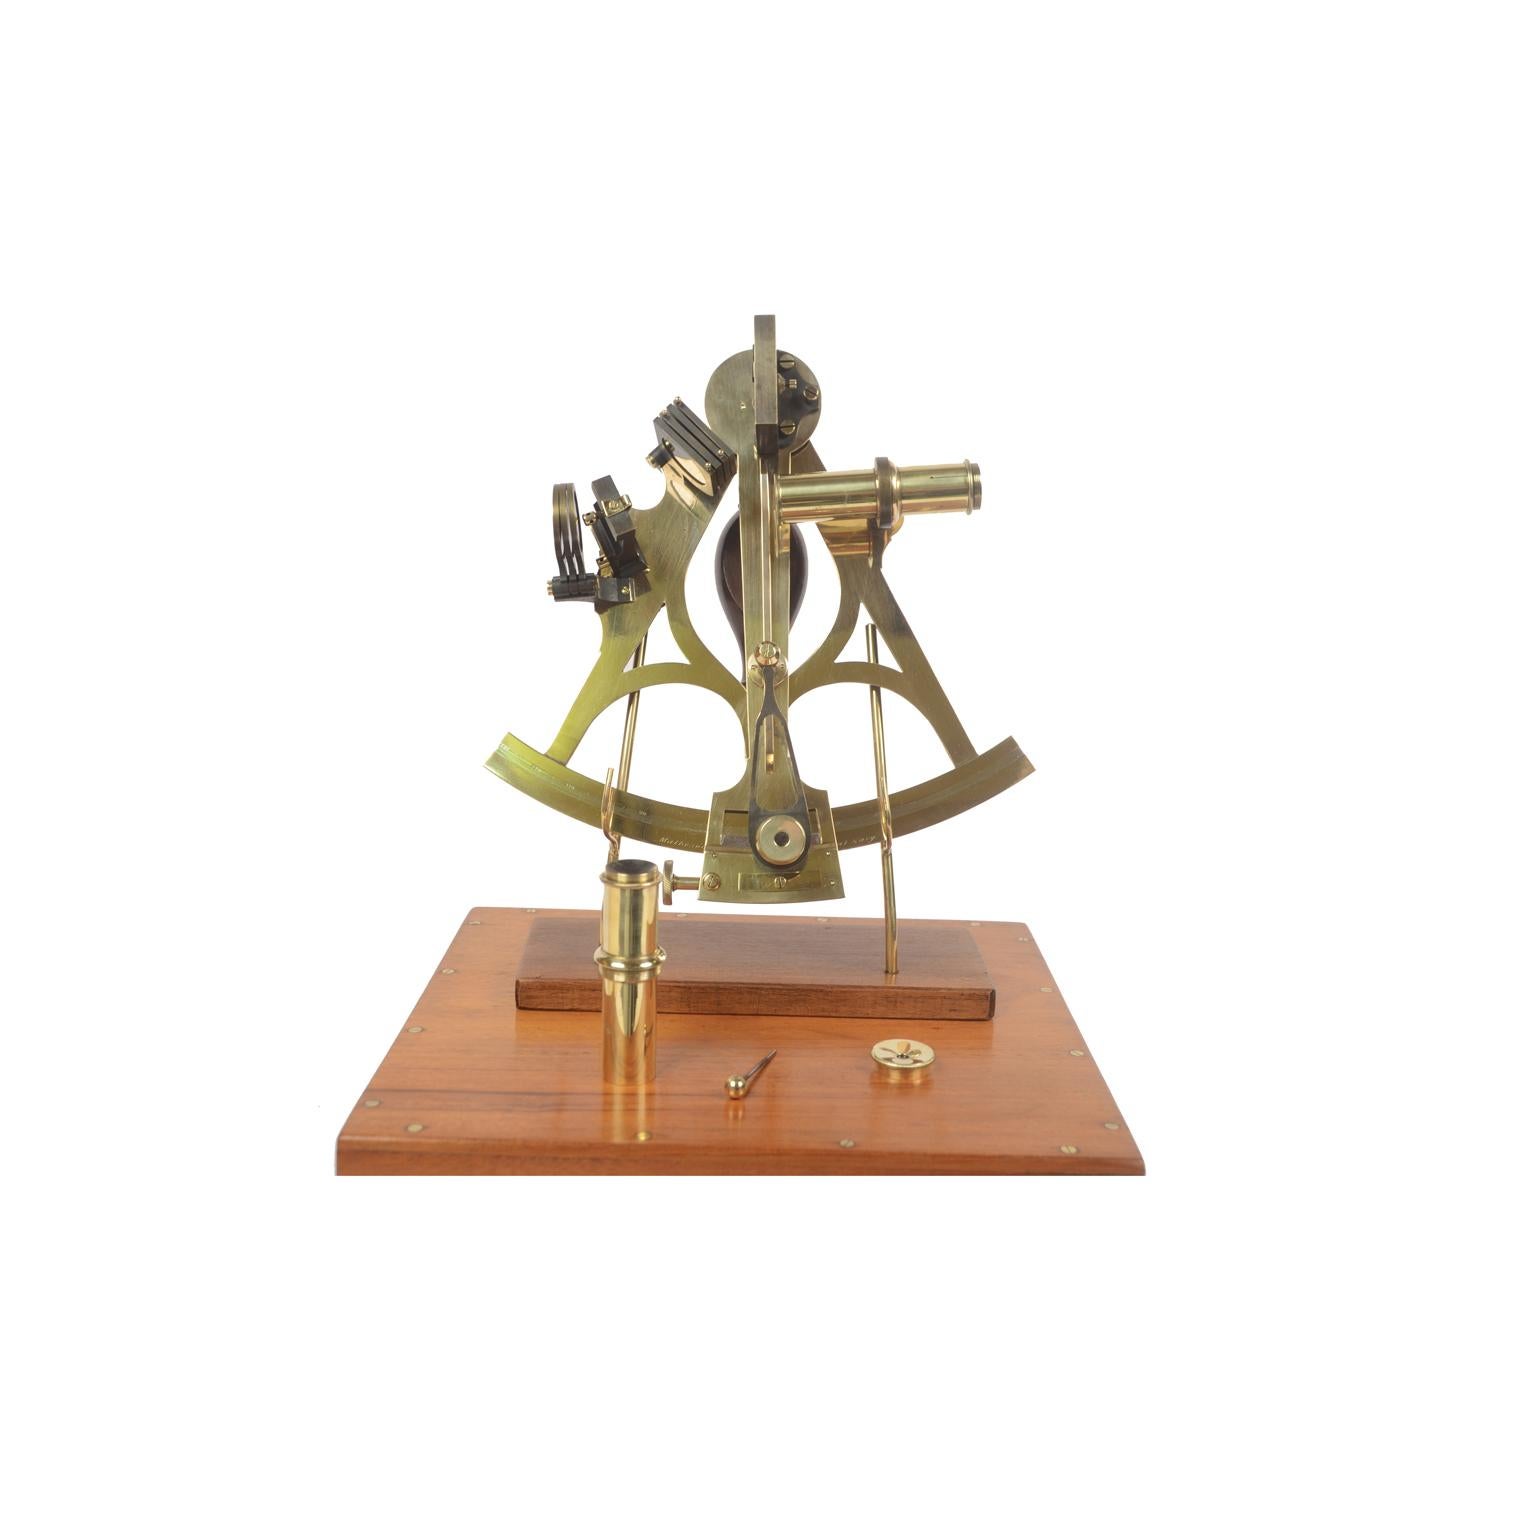 Brass sextant from the second half of the 19th century, signed Matheson & Co Leith Makers to the Royal Navy complete with lenses and placed in its beautiful original mahogany box with brass hinges and hooks. Flap and Vernier mad of silver, wooden